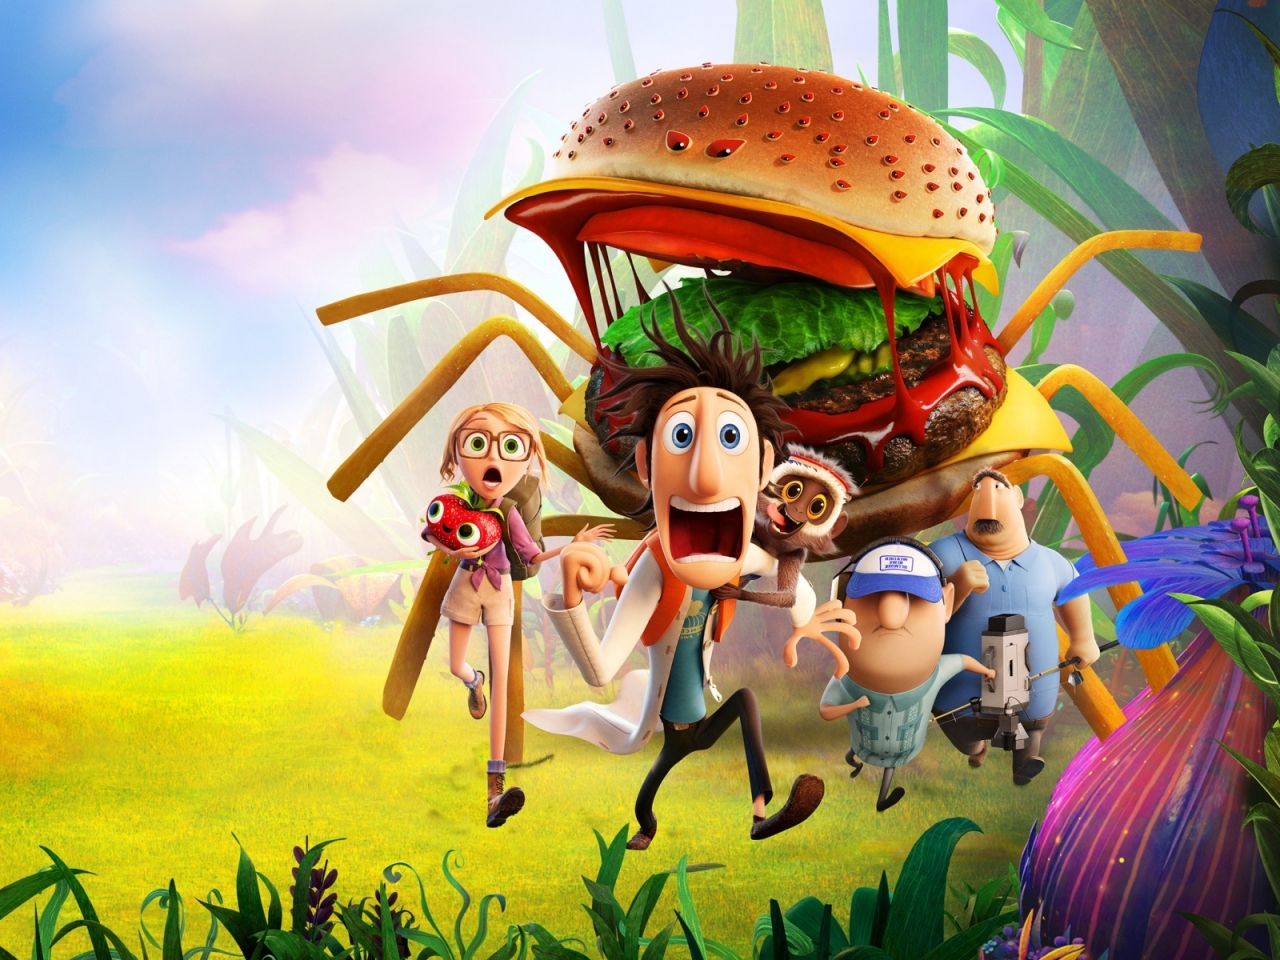 Cloudy with a chance of Meatballs for 1280 x 960 resolution